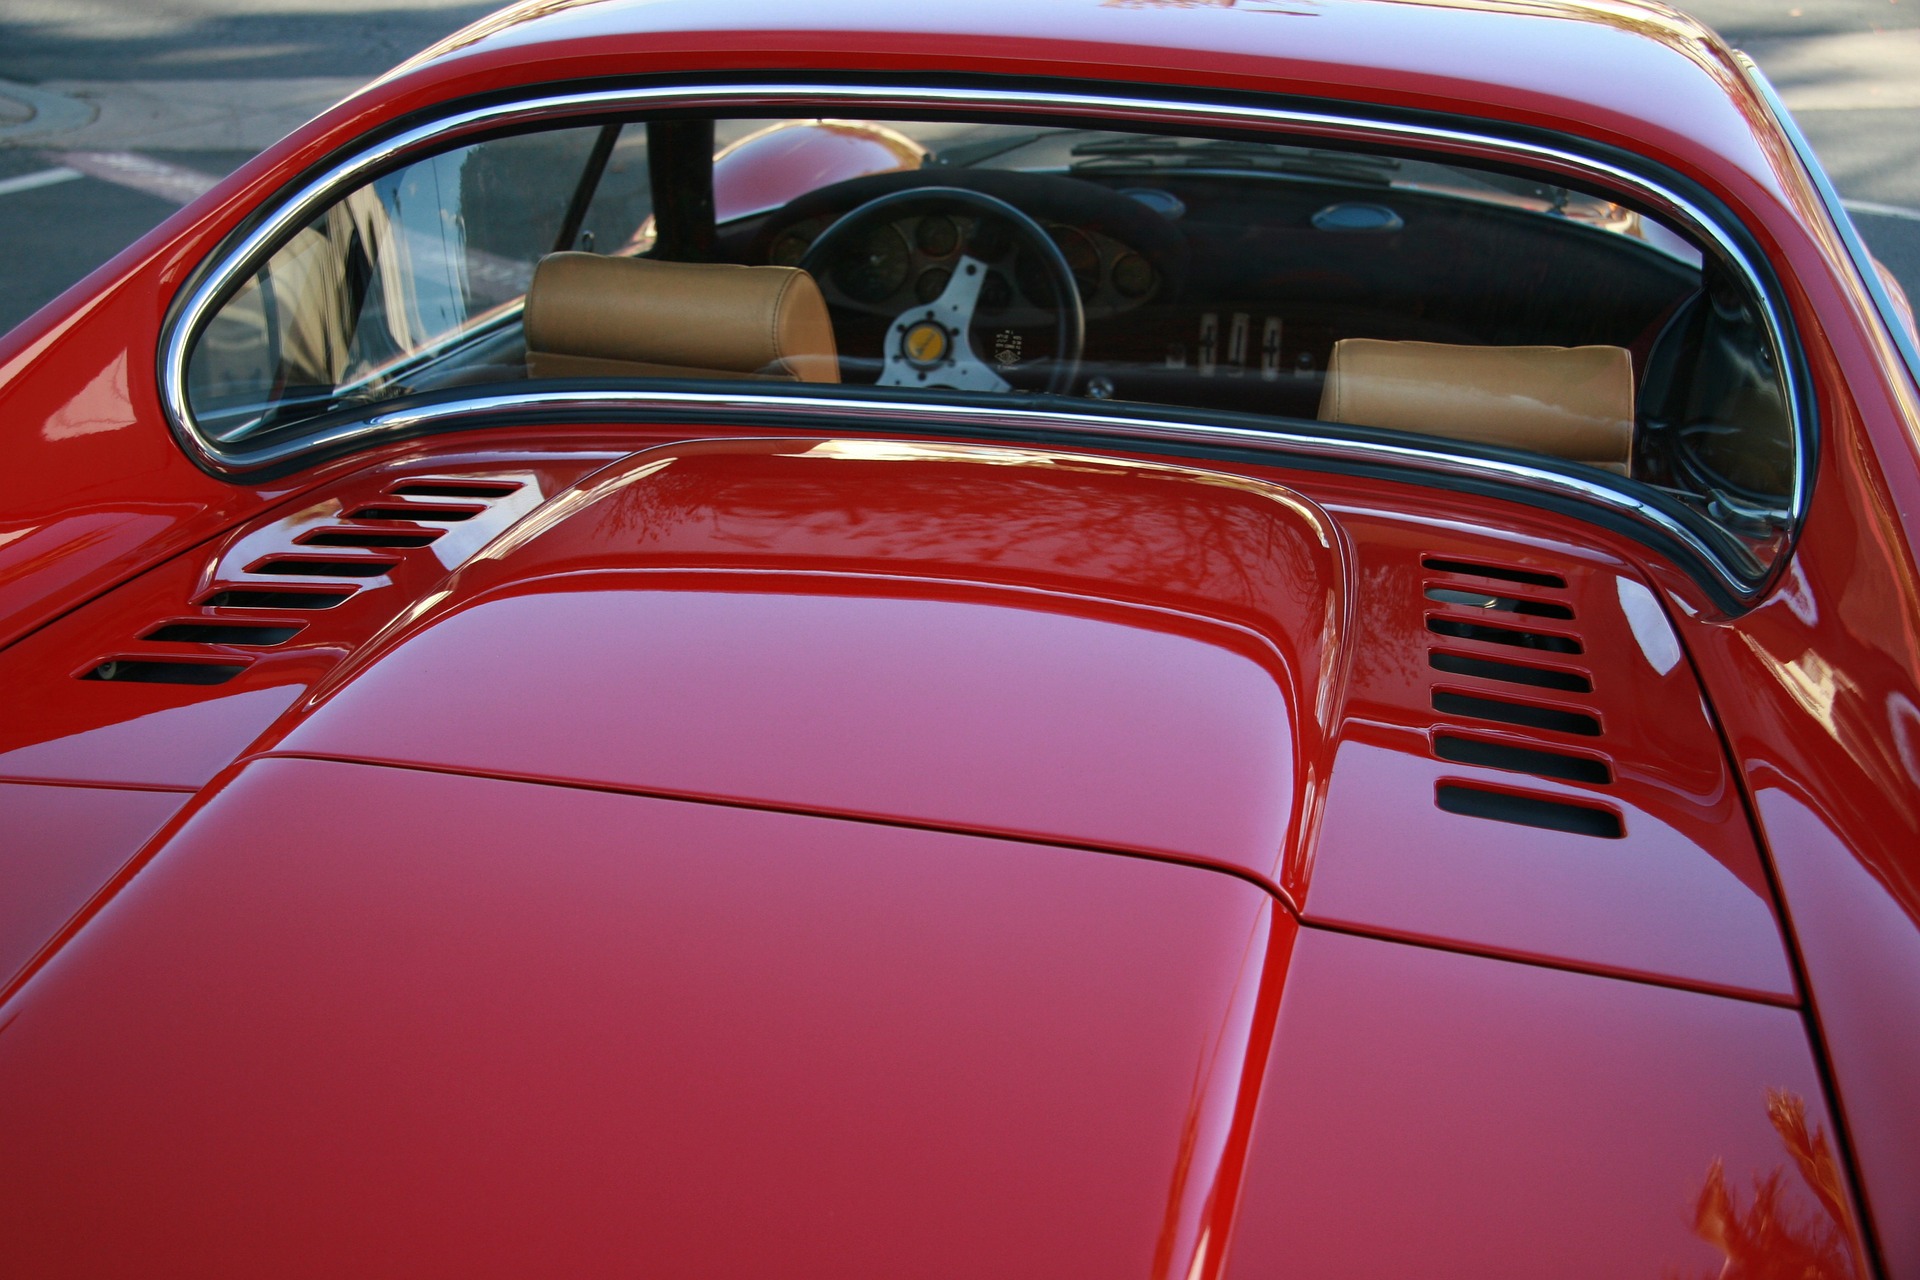 A close up of a red Ferrari from behind.